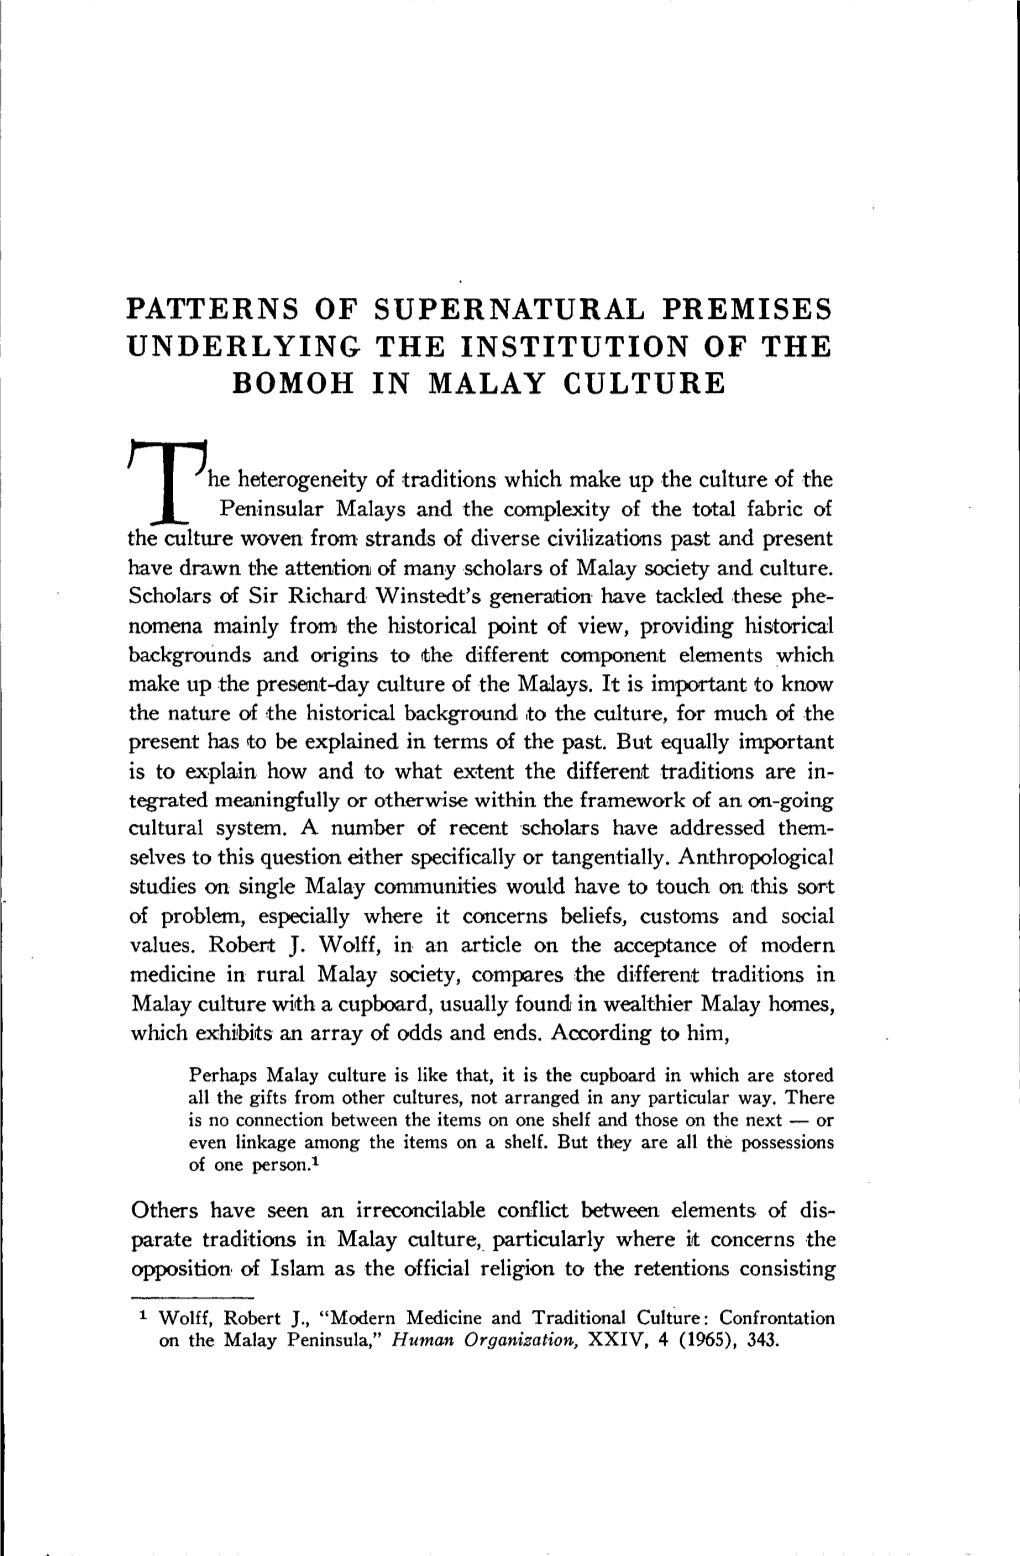 Patterns of Supernatural Premises Underlying the Institution of the Bomoh in Malay Culture